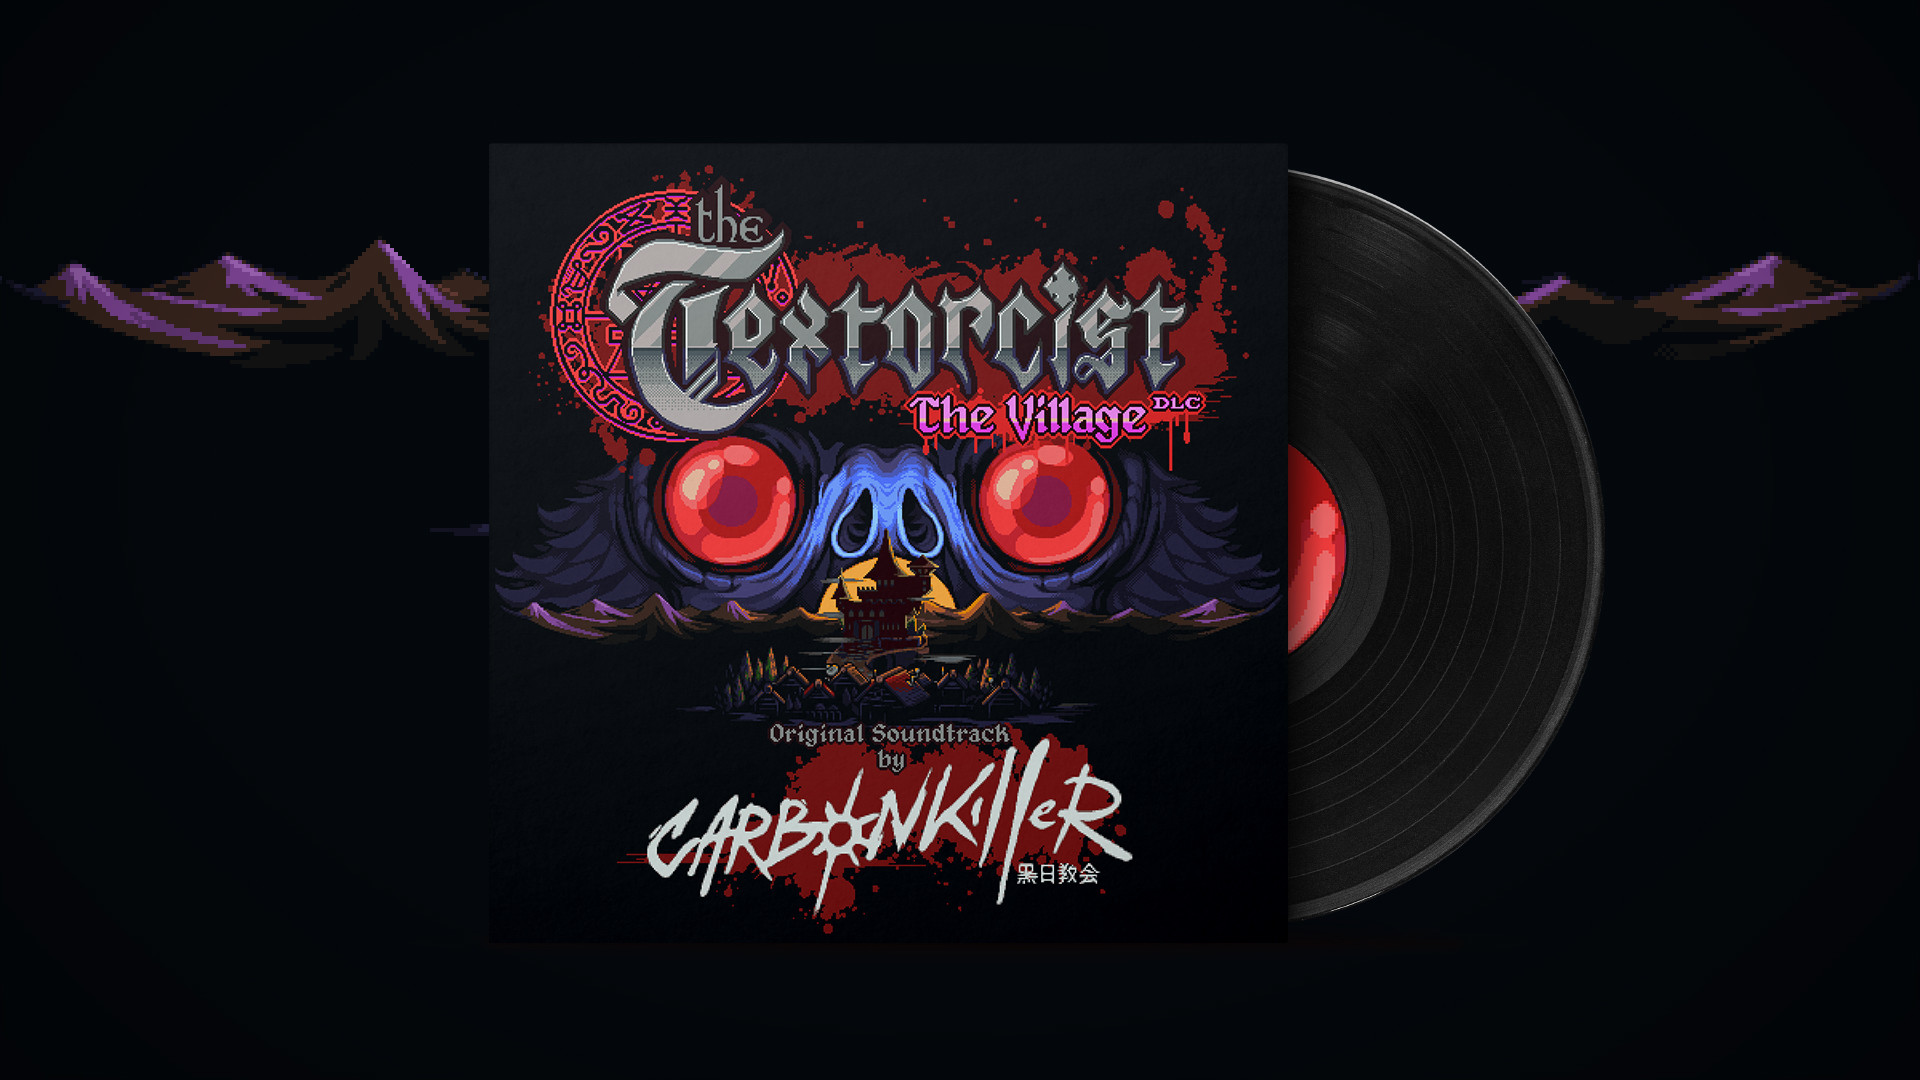 The Textorcist: The Village - Soundtrack Featured Screenshot #1